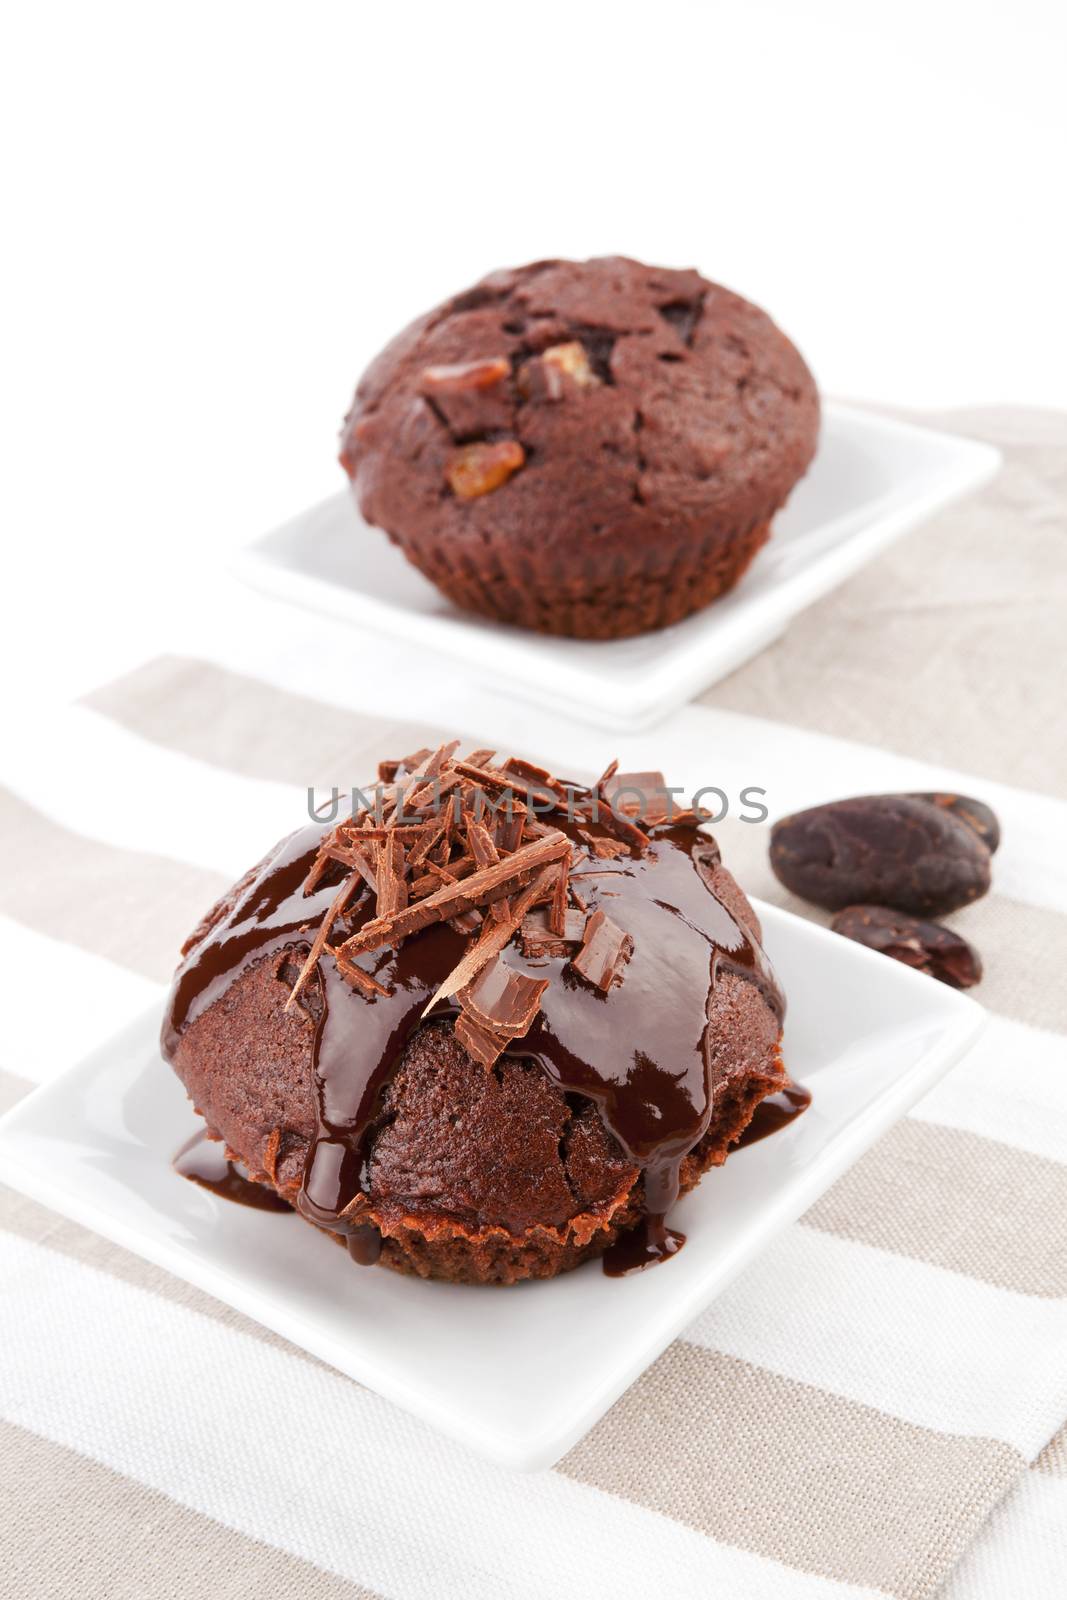 Luxurious chocolate muffins with chocolate garnish in white bowl on kitchen cloth. 